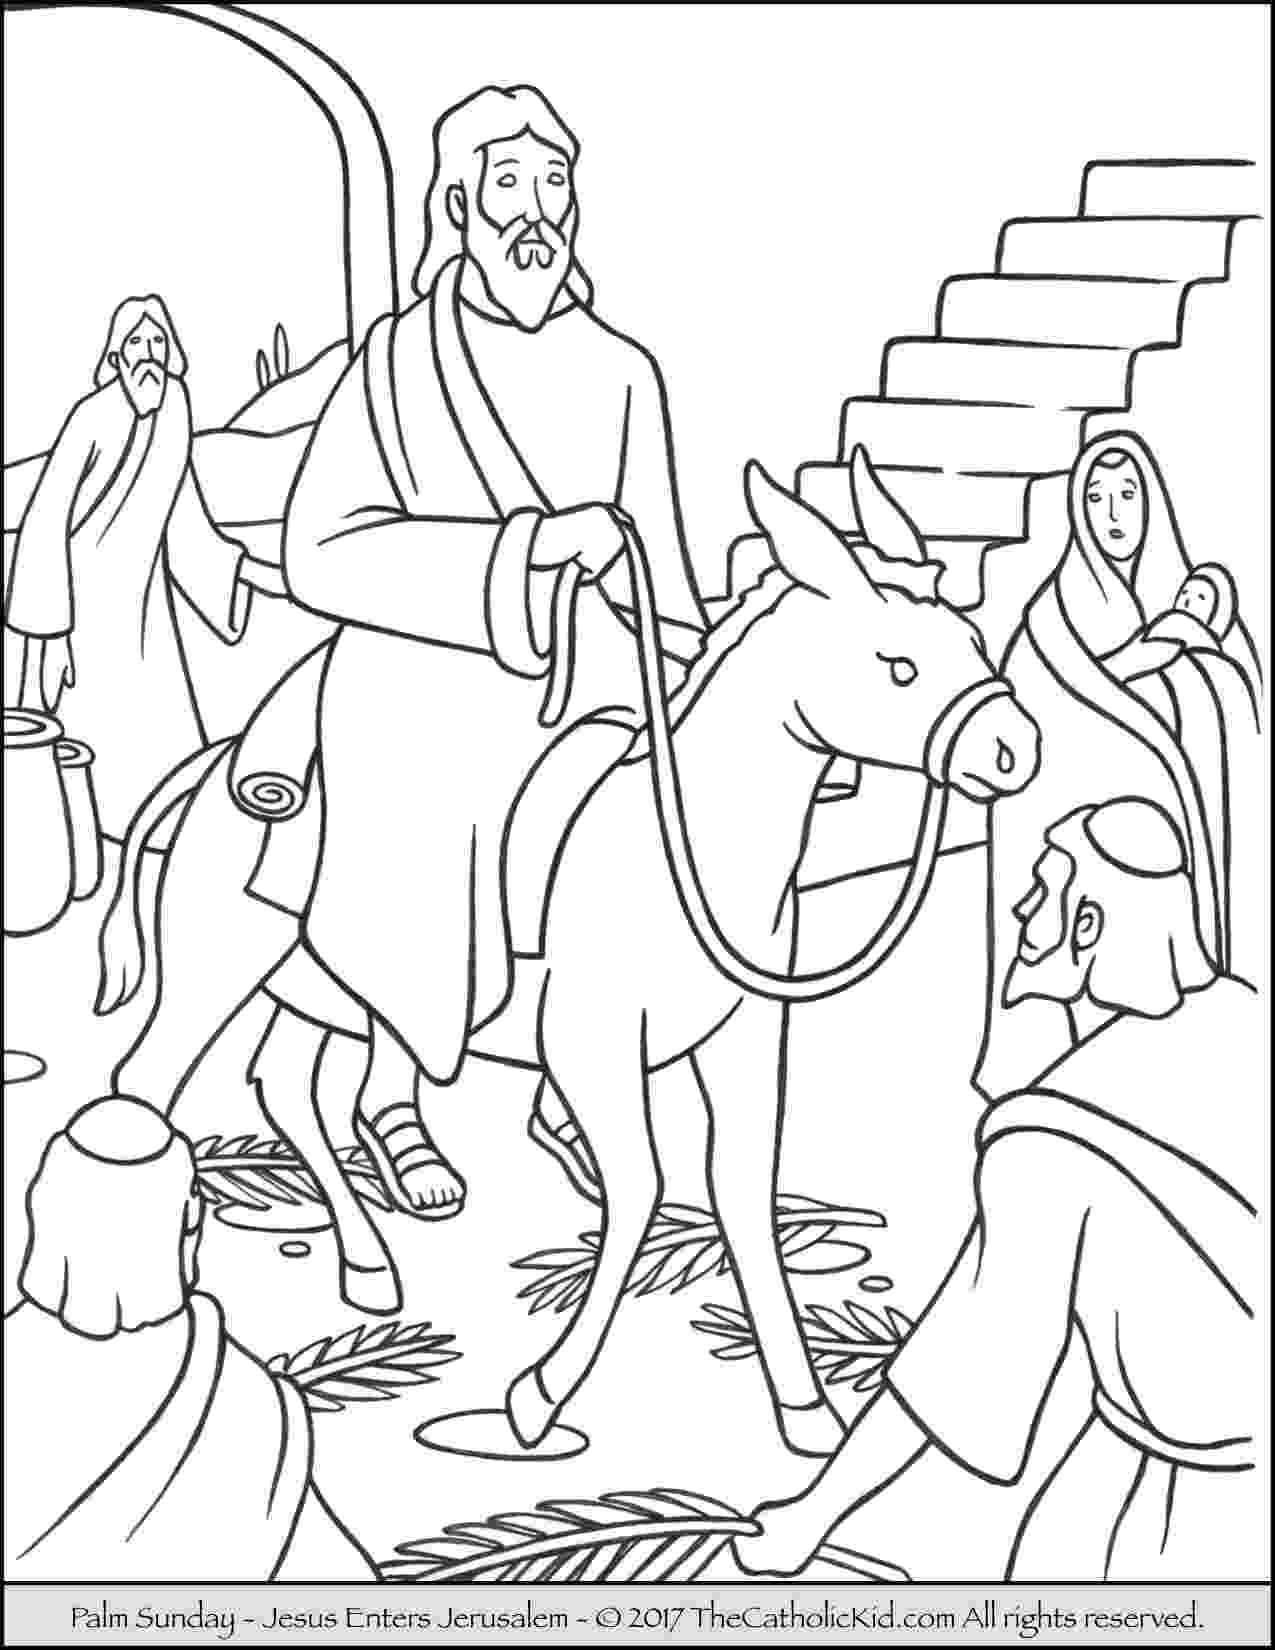 free palm sunday coloring pages palm sunday coloring pages best coloring pages for kids free coloring pages palm sunday 